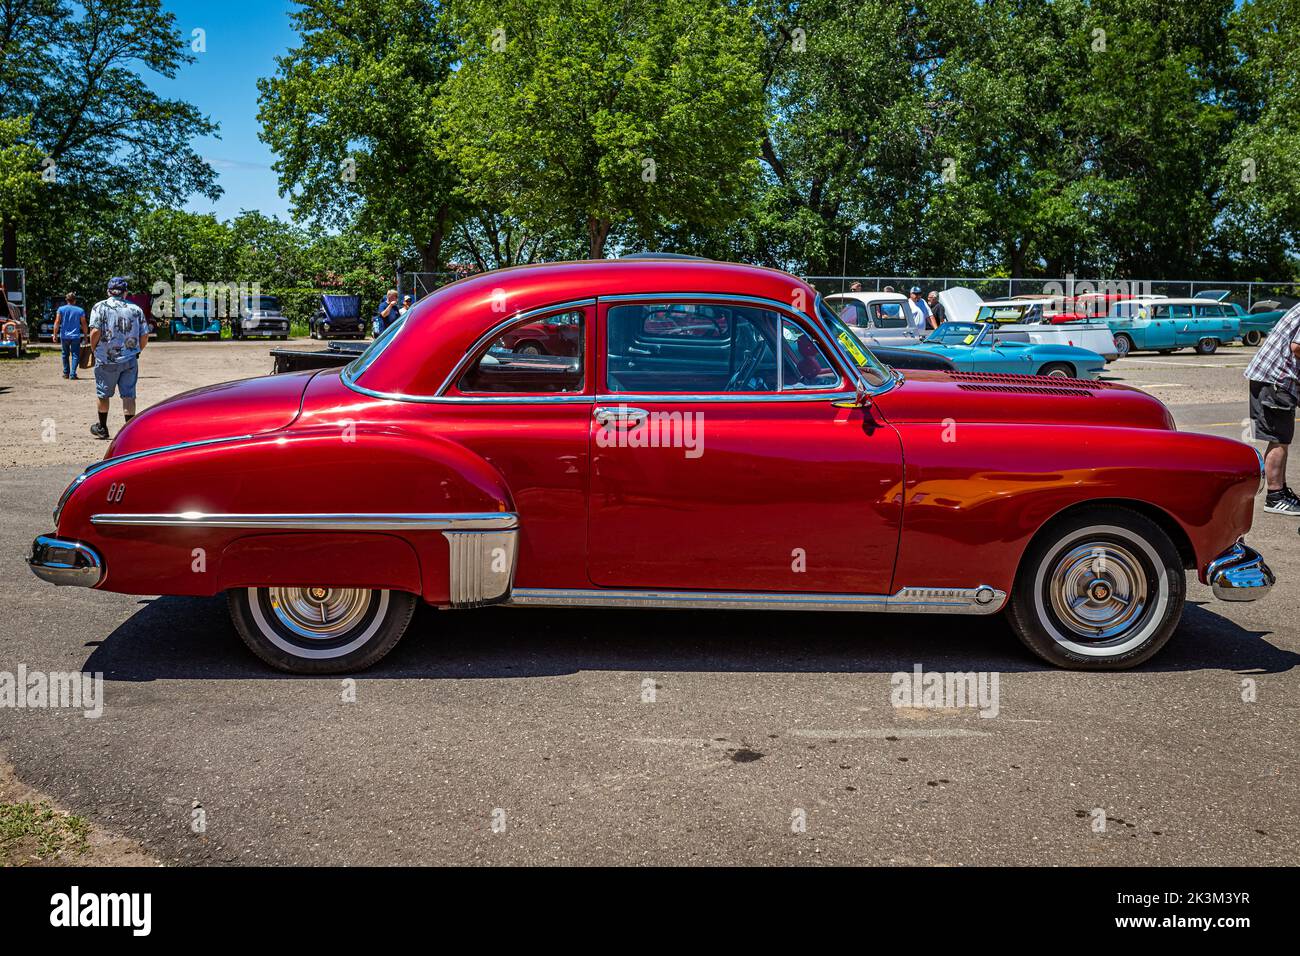 Falcon Heights, MN - June 18, 2022: High perspective side view of a 1949 Oldsmobile Rocket 88 Coupe at a local car show. Stock Photo